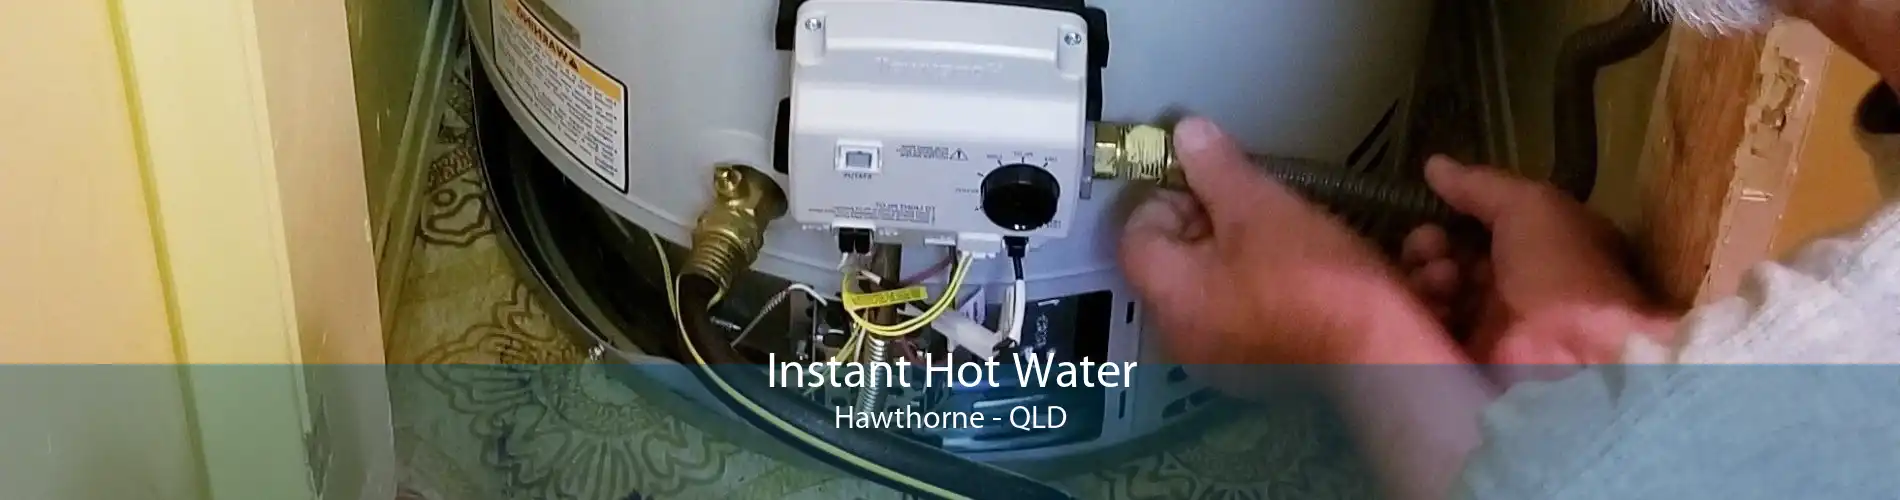 Instant Hot Water Hawthorne - QLD